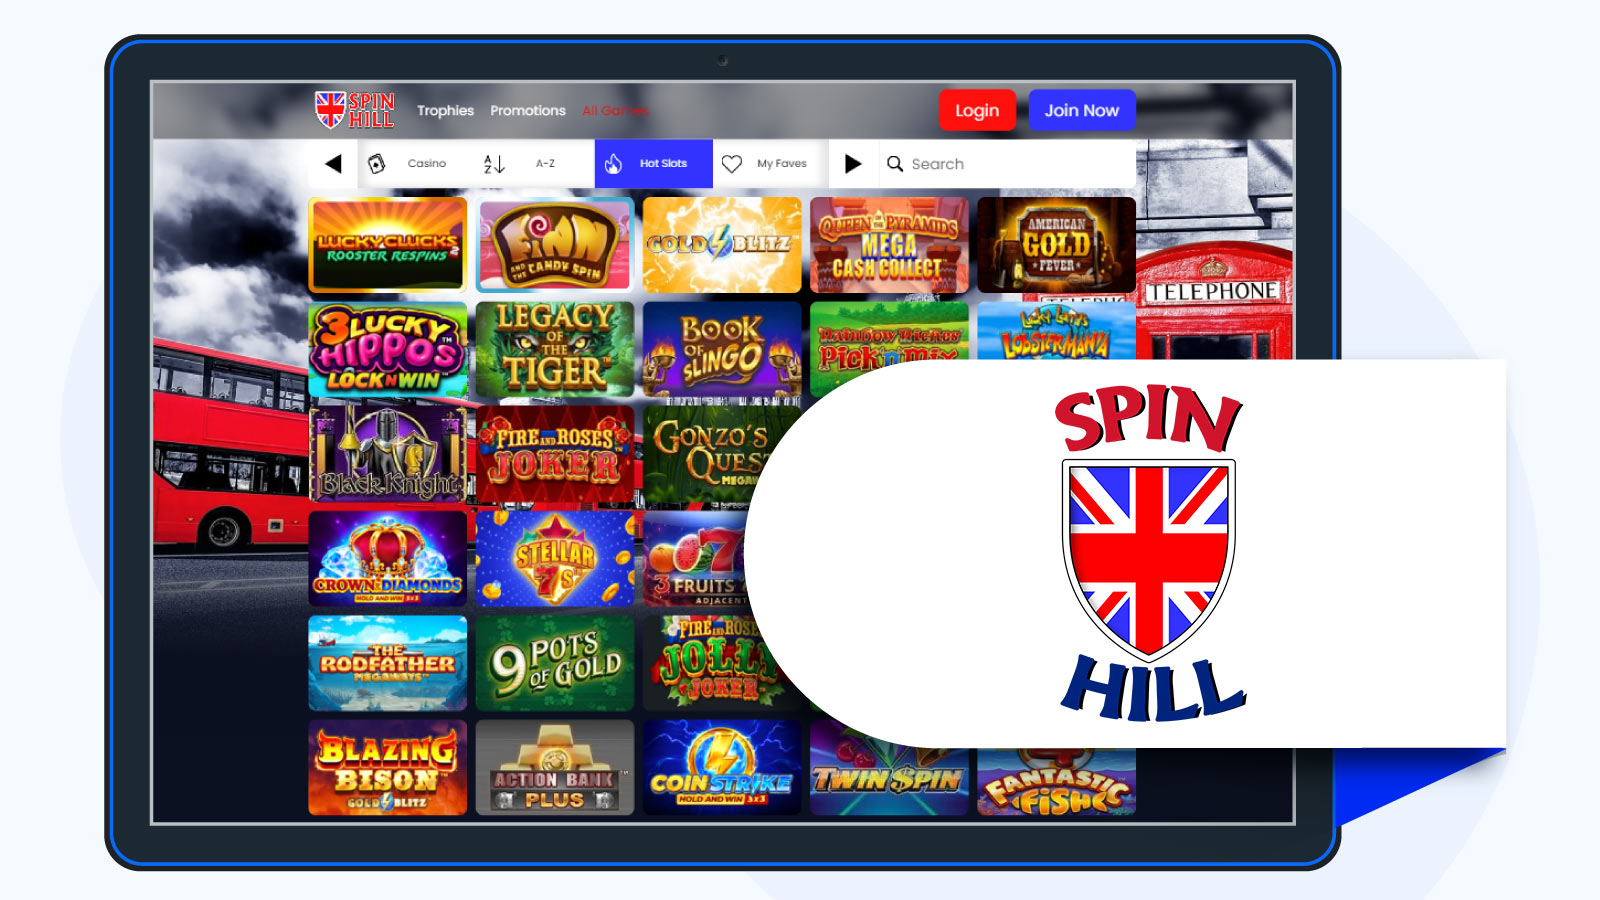 Spin-Hill-Best-bonus-for-gamblers-who-use-Skrill